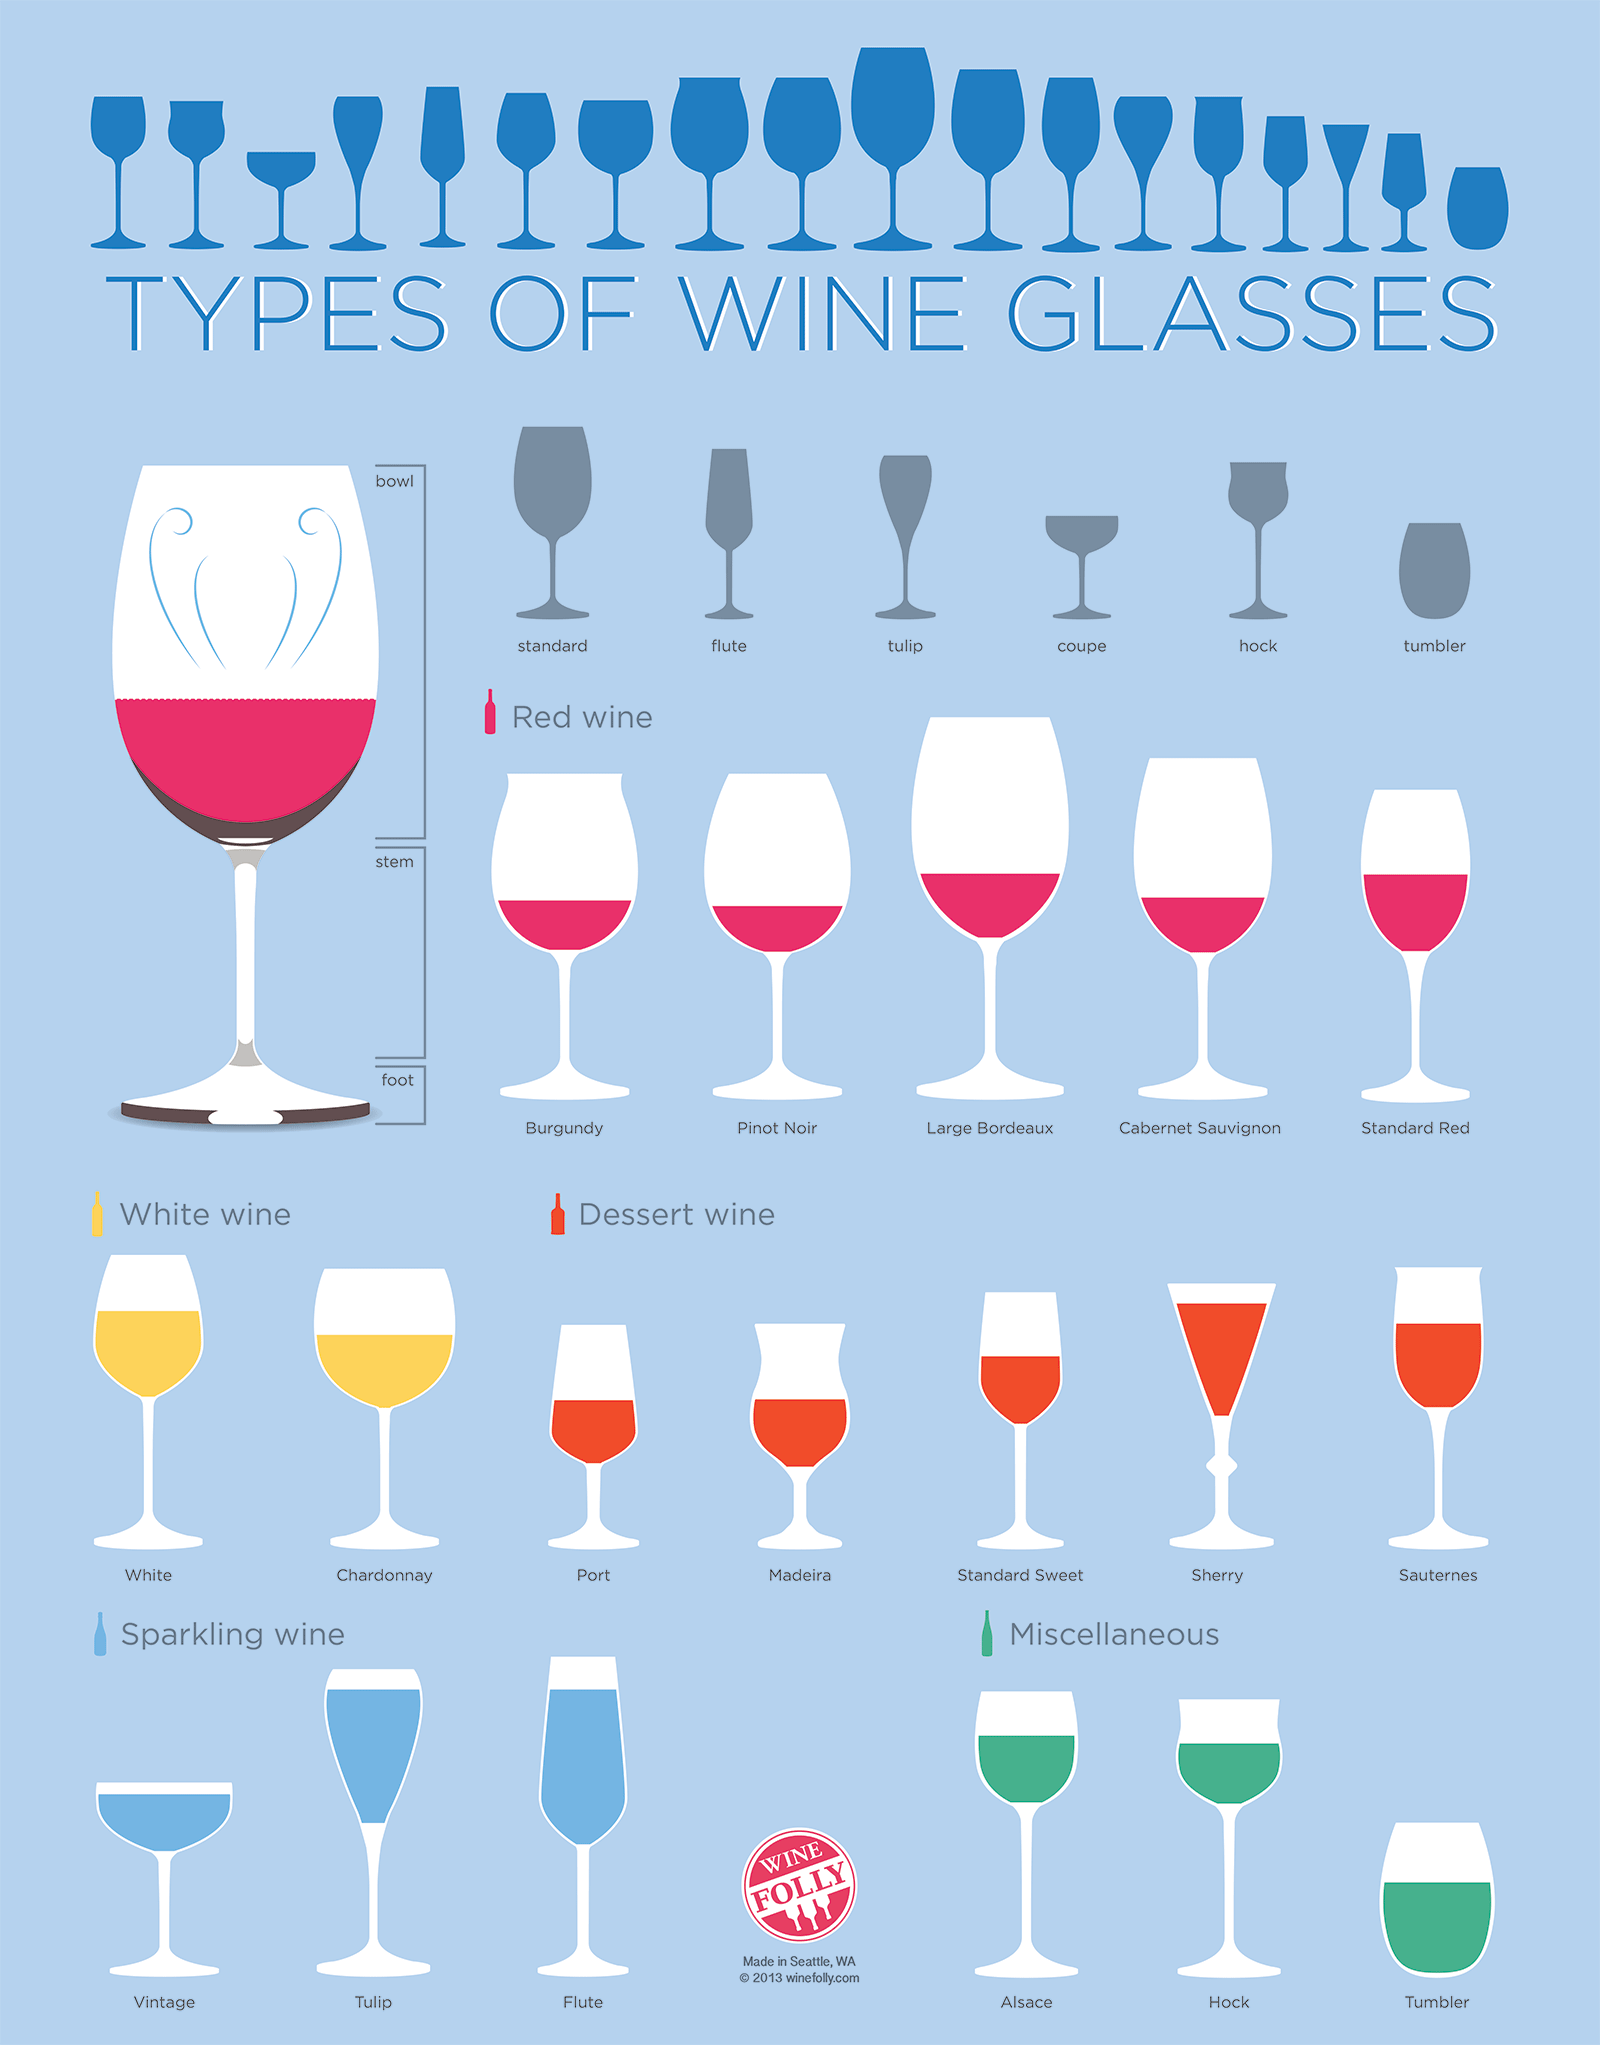 http://www.thewineandfoodreview.com/wp-content/uploads/2014/08/Types-of-Wine-Glasses-Chart.png